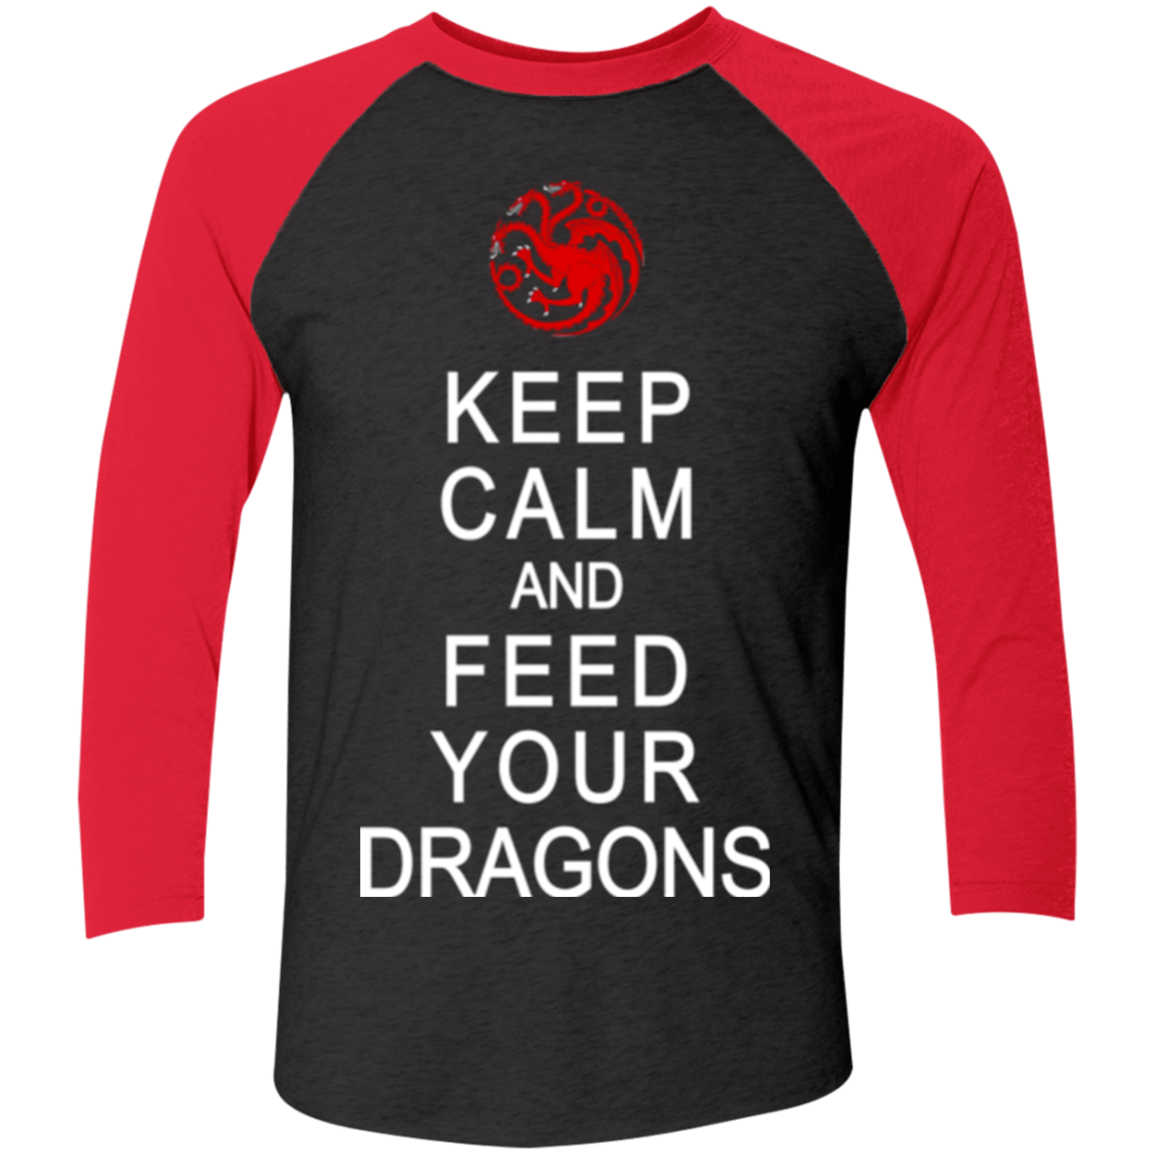 T-Shirts Vintage Black/Vintage Red / X-Small Feed dragons Men's Triblend 3/4 Sleeve